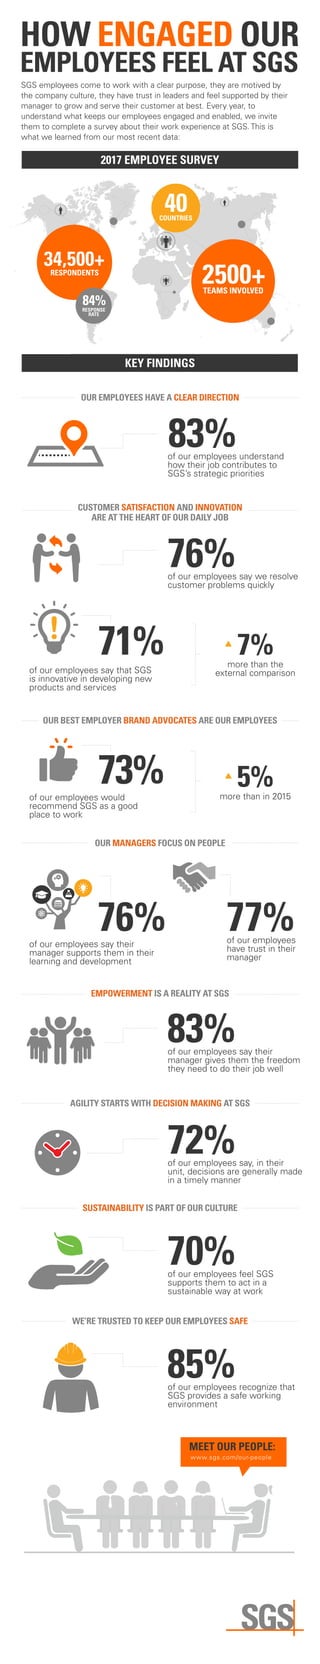 HOW ENGAGED OUR
EMPLOYEES FEEL AT SGS
2017 EMPLOYEE SURVEY
KEY FINDINGS
MEET OUR PEOPLE:
www.sgs.com/our-people
SGS employees come to work with a clear purpose, they are motived by
the company culture, they have trust in leaders and feel supported by their
manager to grow and serve their customer at best. Every year, to
understand what keeps our employees engaged and enabled, we invite
them to complete a survey about their work experience at SGS. This is
what we learned from our most recent data:
40COUNTRIES
34,500+RESPONDENTS
2500+TEAMS INVOLVED
84%RESPONSE
RATE
of our employees understand
how their job contributes to
SGS’s strategic priorities
83%
OUR EMPLOYEES HAVE A CLEAR DIRECTION
of our employees say that SGS
is innovative in developing new
products and services
71% more than the
external comparison
7%
of our employees say we resolve
customer problems quickly
76%
CUSTOMER SATISFACTION AND INNOVATION
ARE AT THE HEART OF OUR DAILY JOB
of our employees would
recommend SGS as a good
place to work
73% more than in 2015
5%
OUR BEST EMPLOYER BRAND ADVOCATES ARE OUR EMPLOYEES
of our employees say their
manager supports them in their
learning and development
76% of our employees
have trust in their
manager
77%
OUR MANAGERS FOCUS ON PEOPLE
of our employees say their
manager gives them the freedom
they need to do their job well
83%
EMPOWERMENT IS A REALITY AT SGS
of our employees say, in their
unit, decisions are generally made
in a timely manner
72%
AGILITY STARTS WITH DECISION MAKING AT SGS
of our employees recognize that
SGS provides a safe working
environment
85%
WE’RE TRUSTED TO KEEP OUR EMPLOYEES SAFE
of our employees feel SGS
supports them to act in a
sustainable way at work
70%
SUSTAINABILITY IS PART OF OUR CULTURE
 